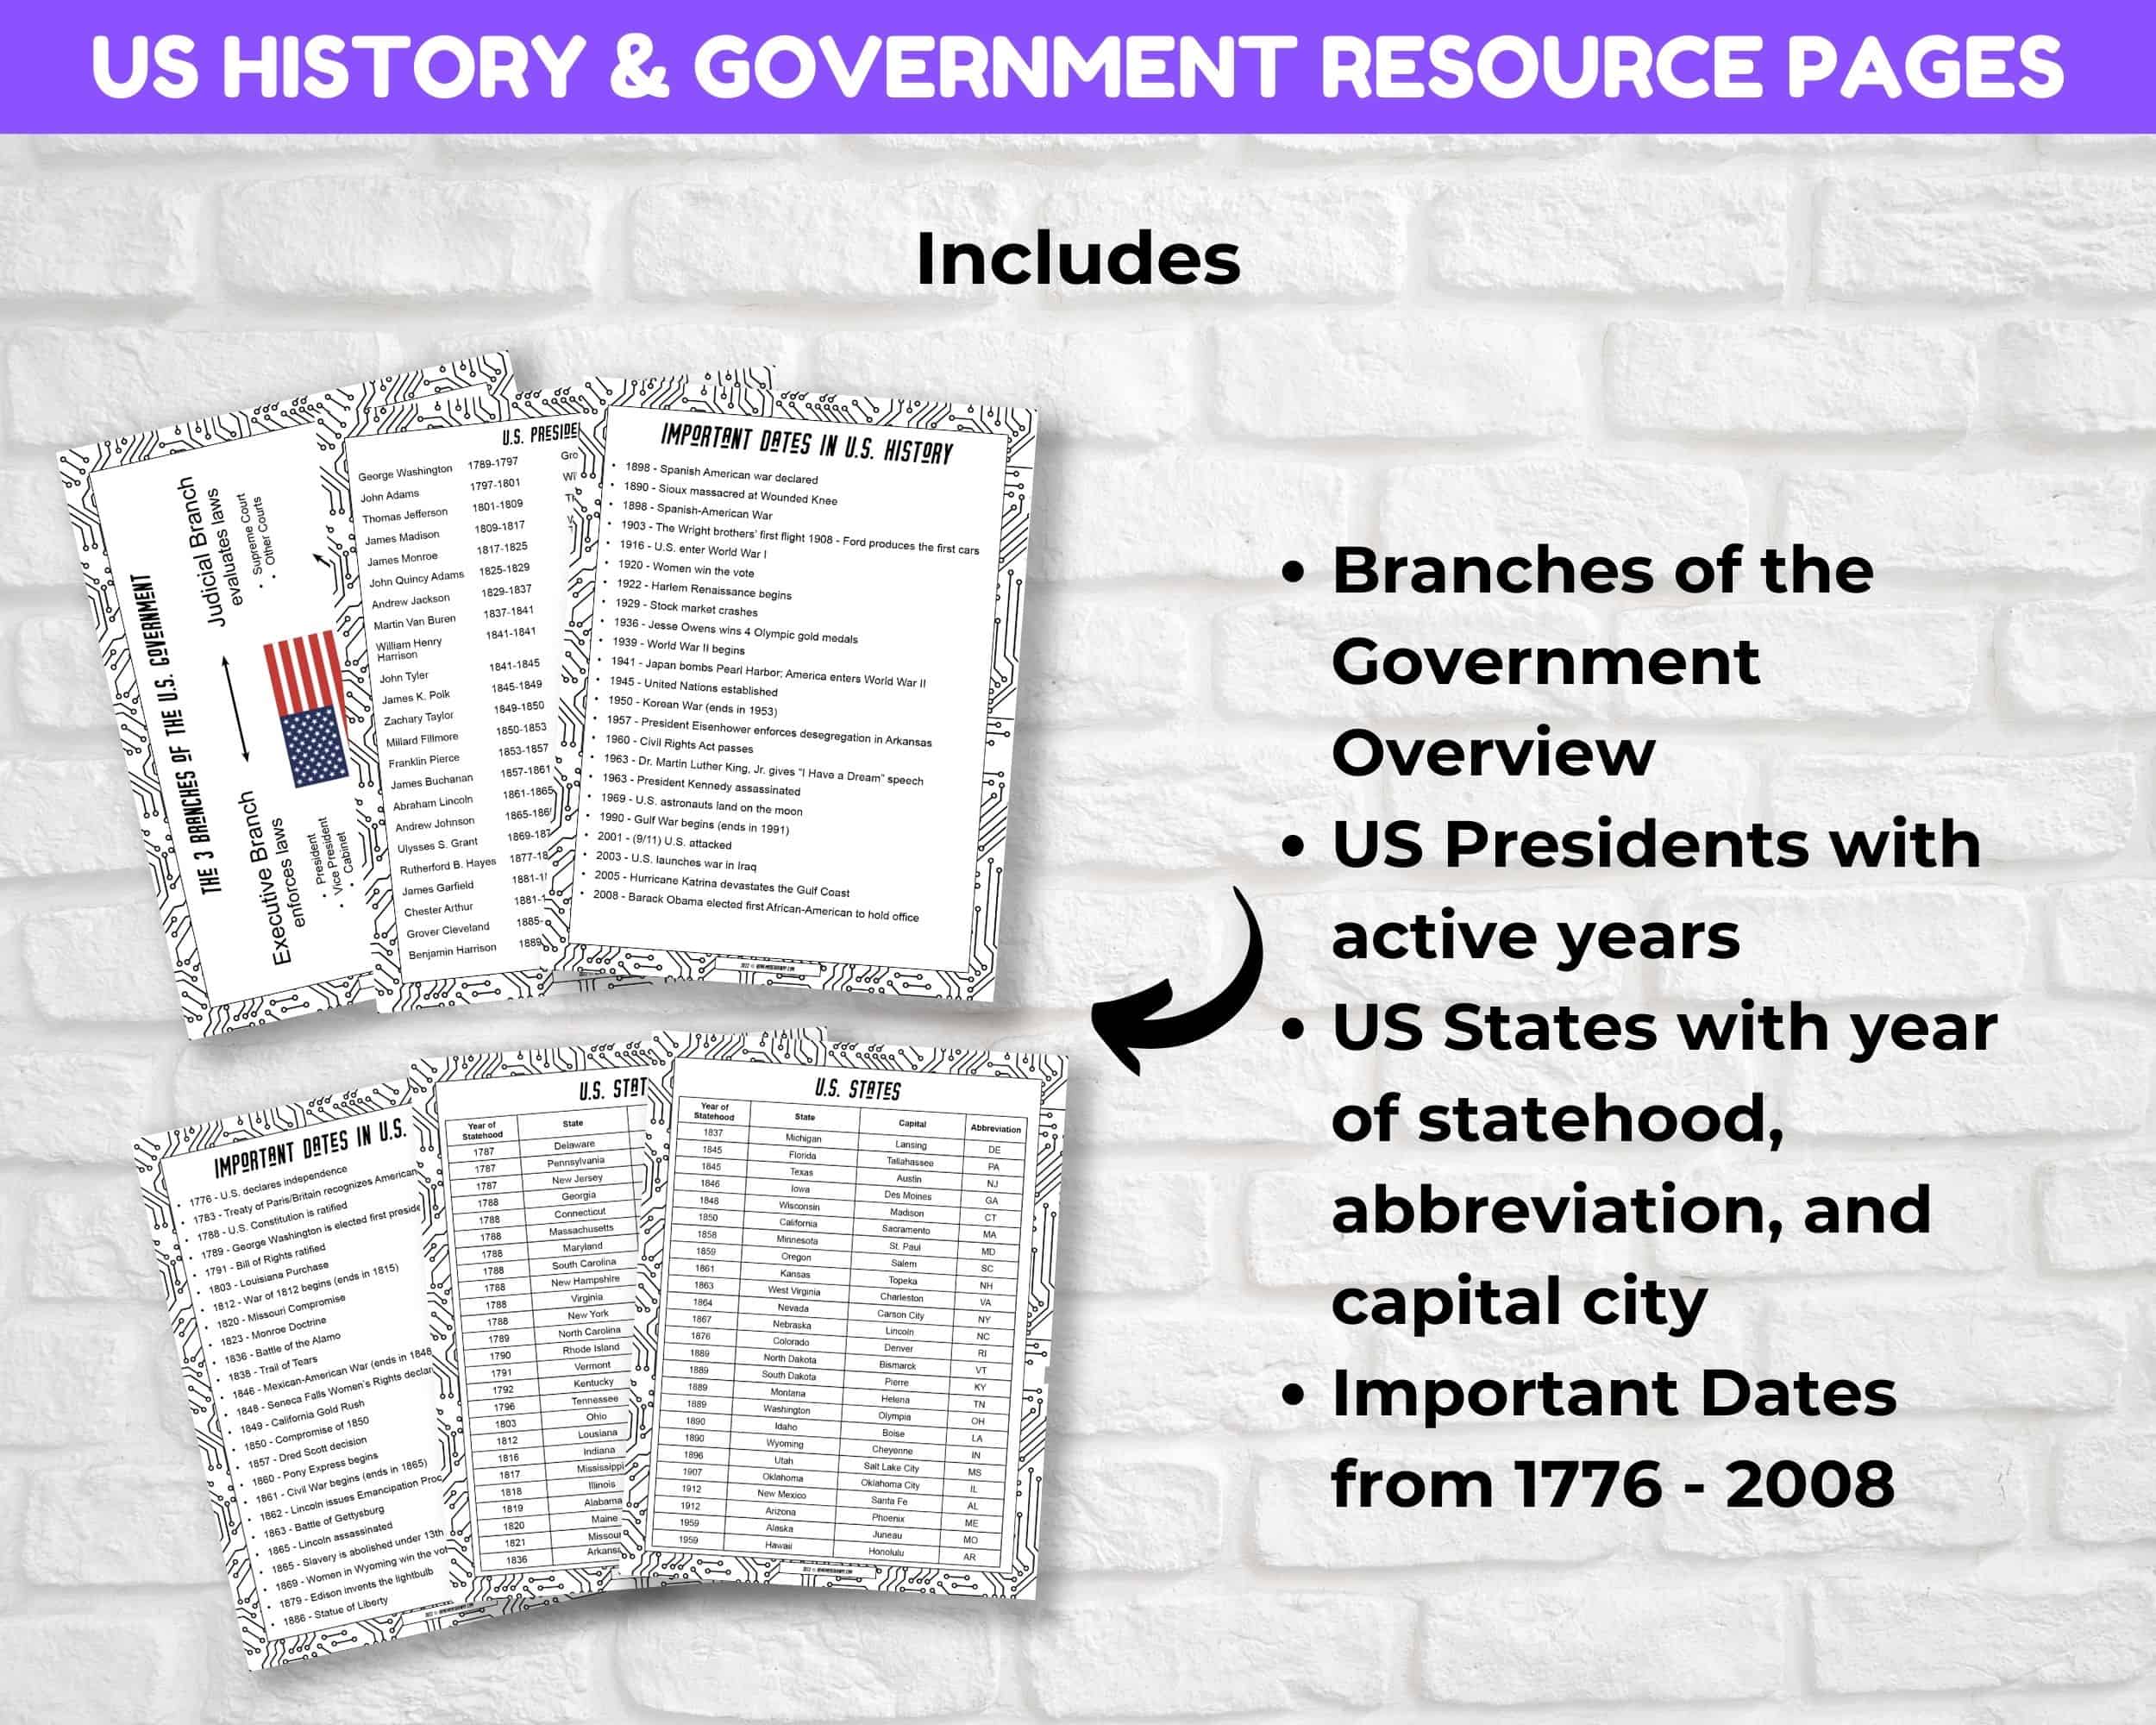 US History & Government Resource Pages